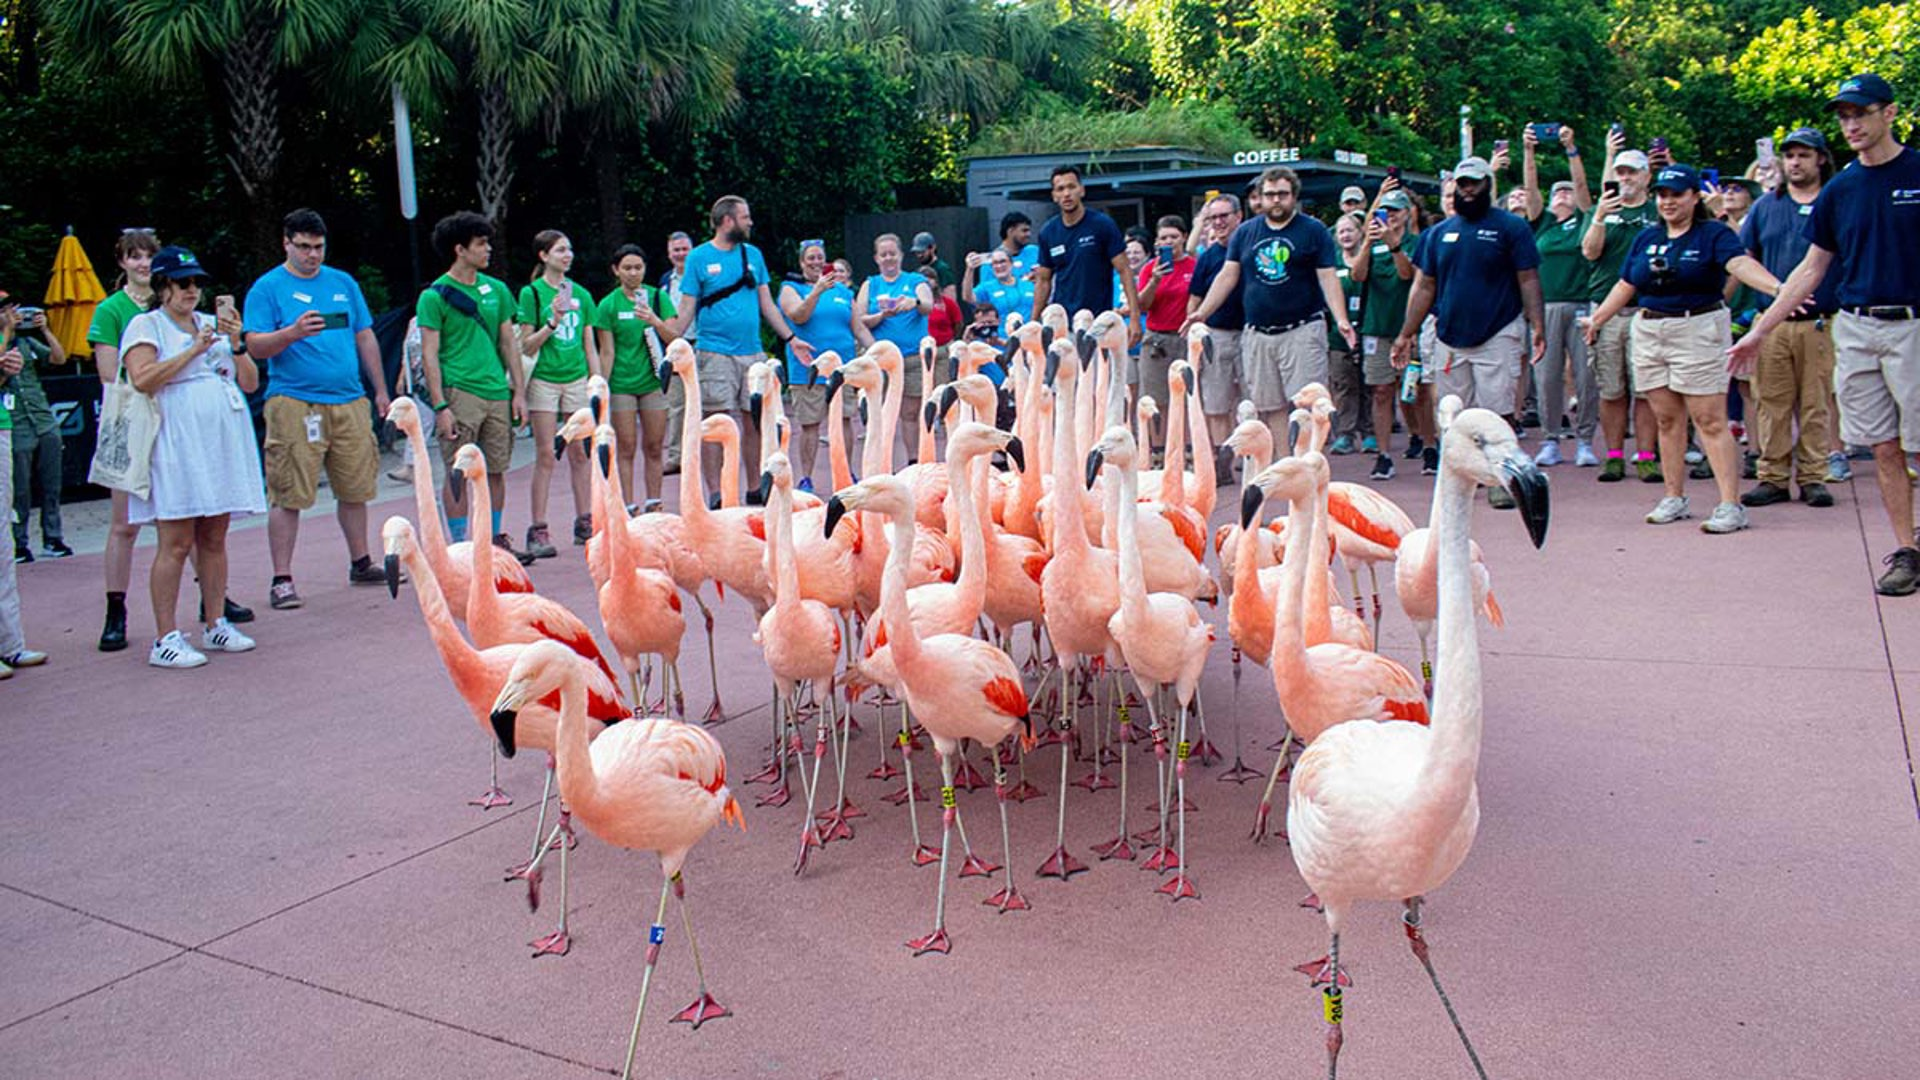 About 200 zoo employees and volunteers helped direct the 54 Chilean flamingos to their new neighborhood by forming a human wall along the way.